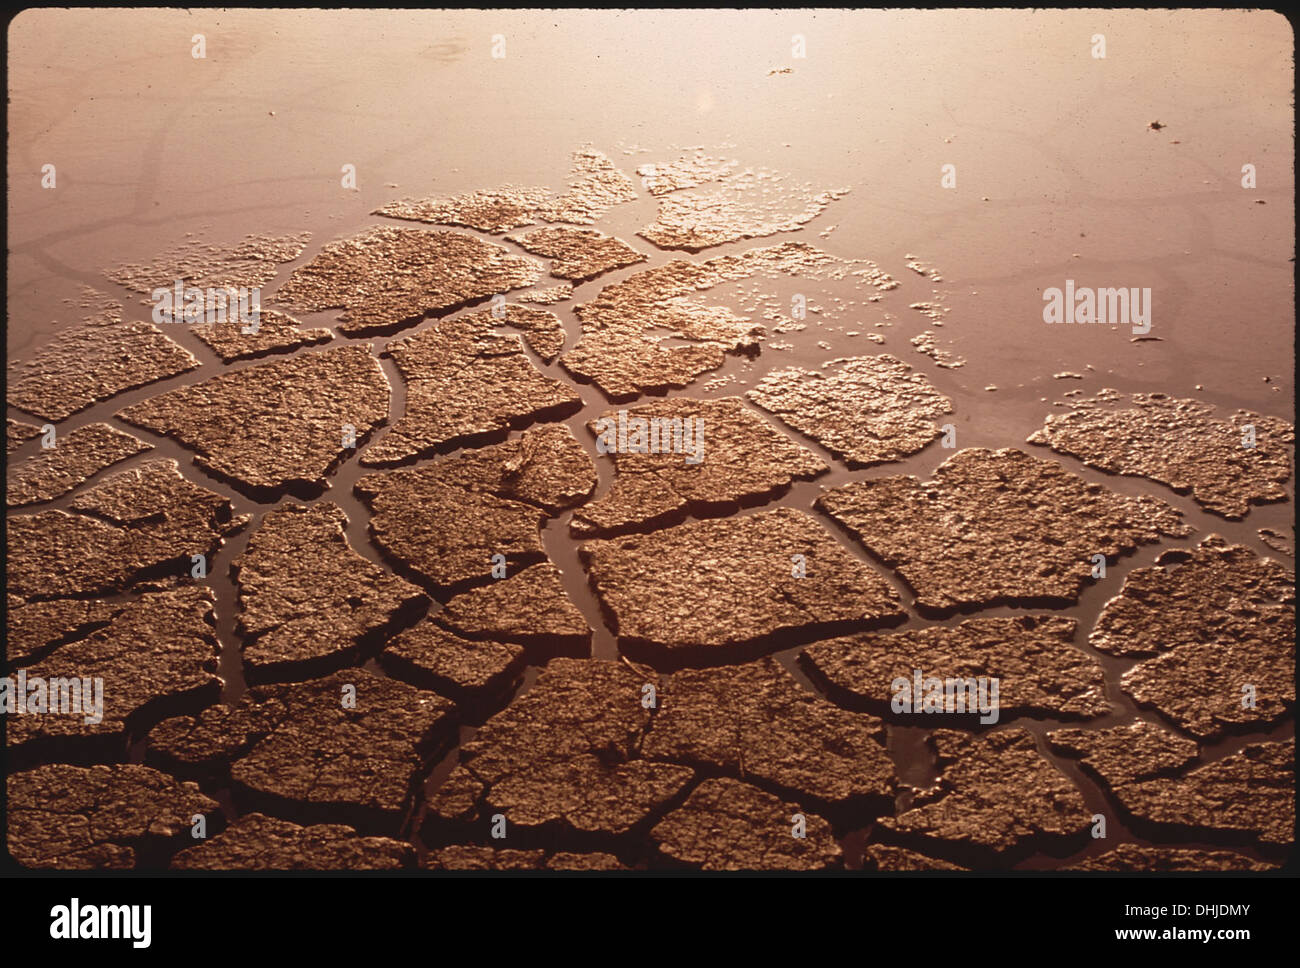 DRAINAGE OF MARSH LEAVES PARQUETS OF DRY, CRACKED MUD 176 Stock Photo